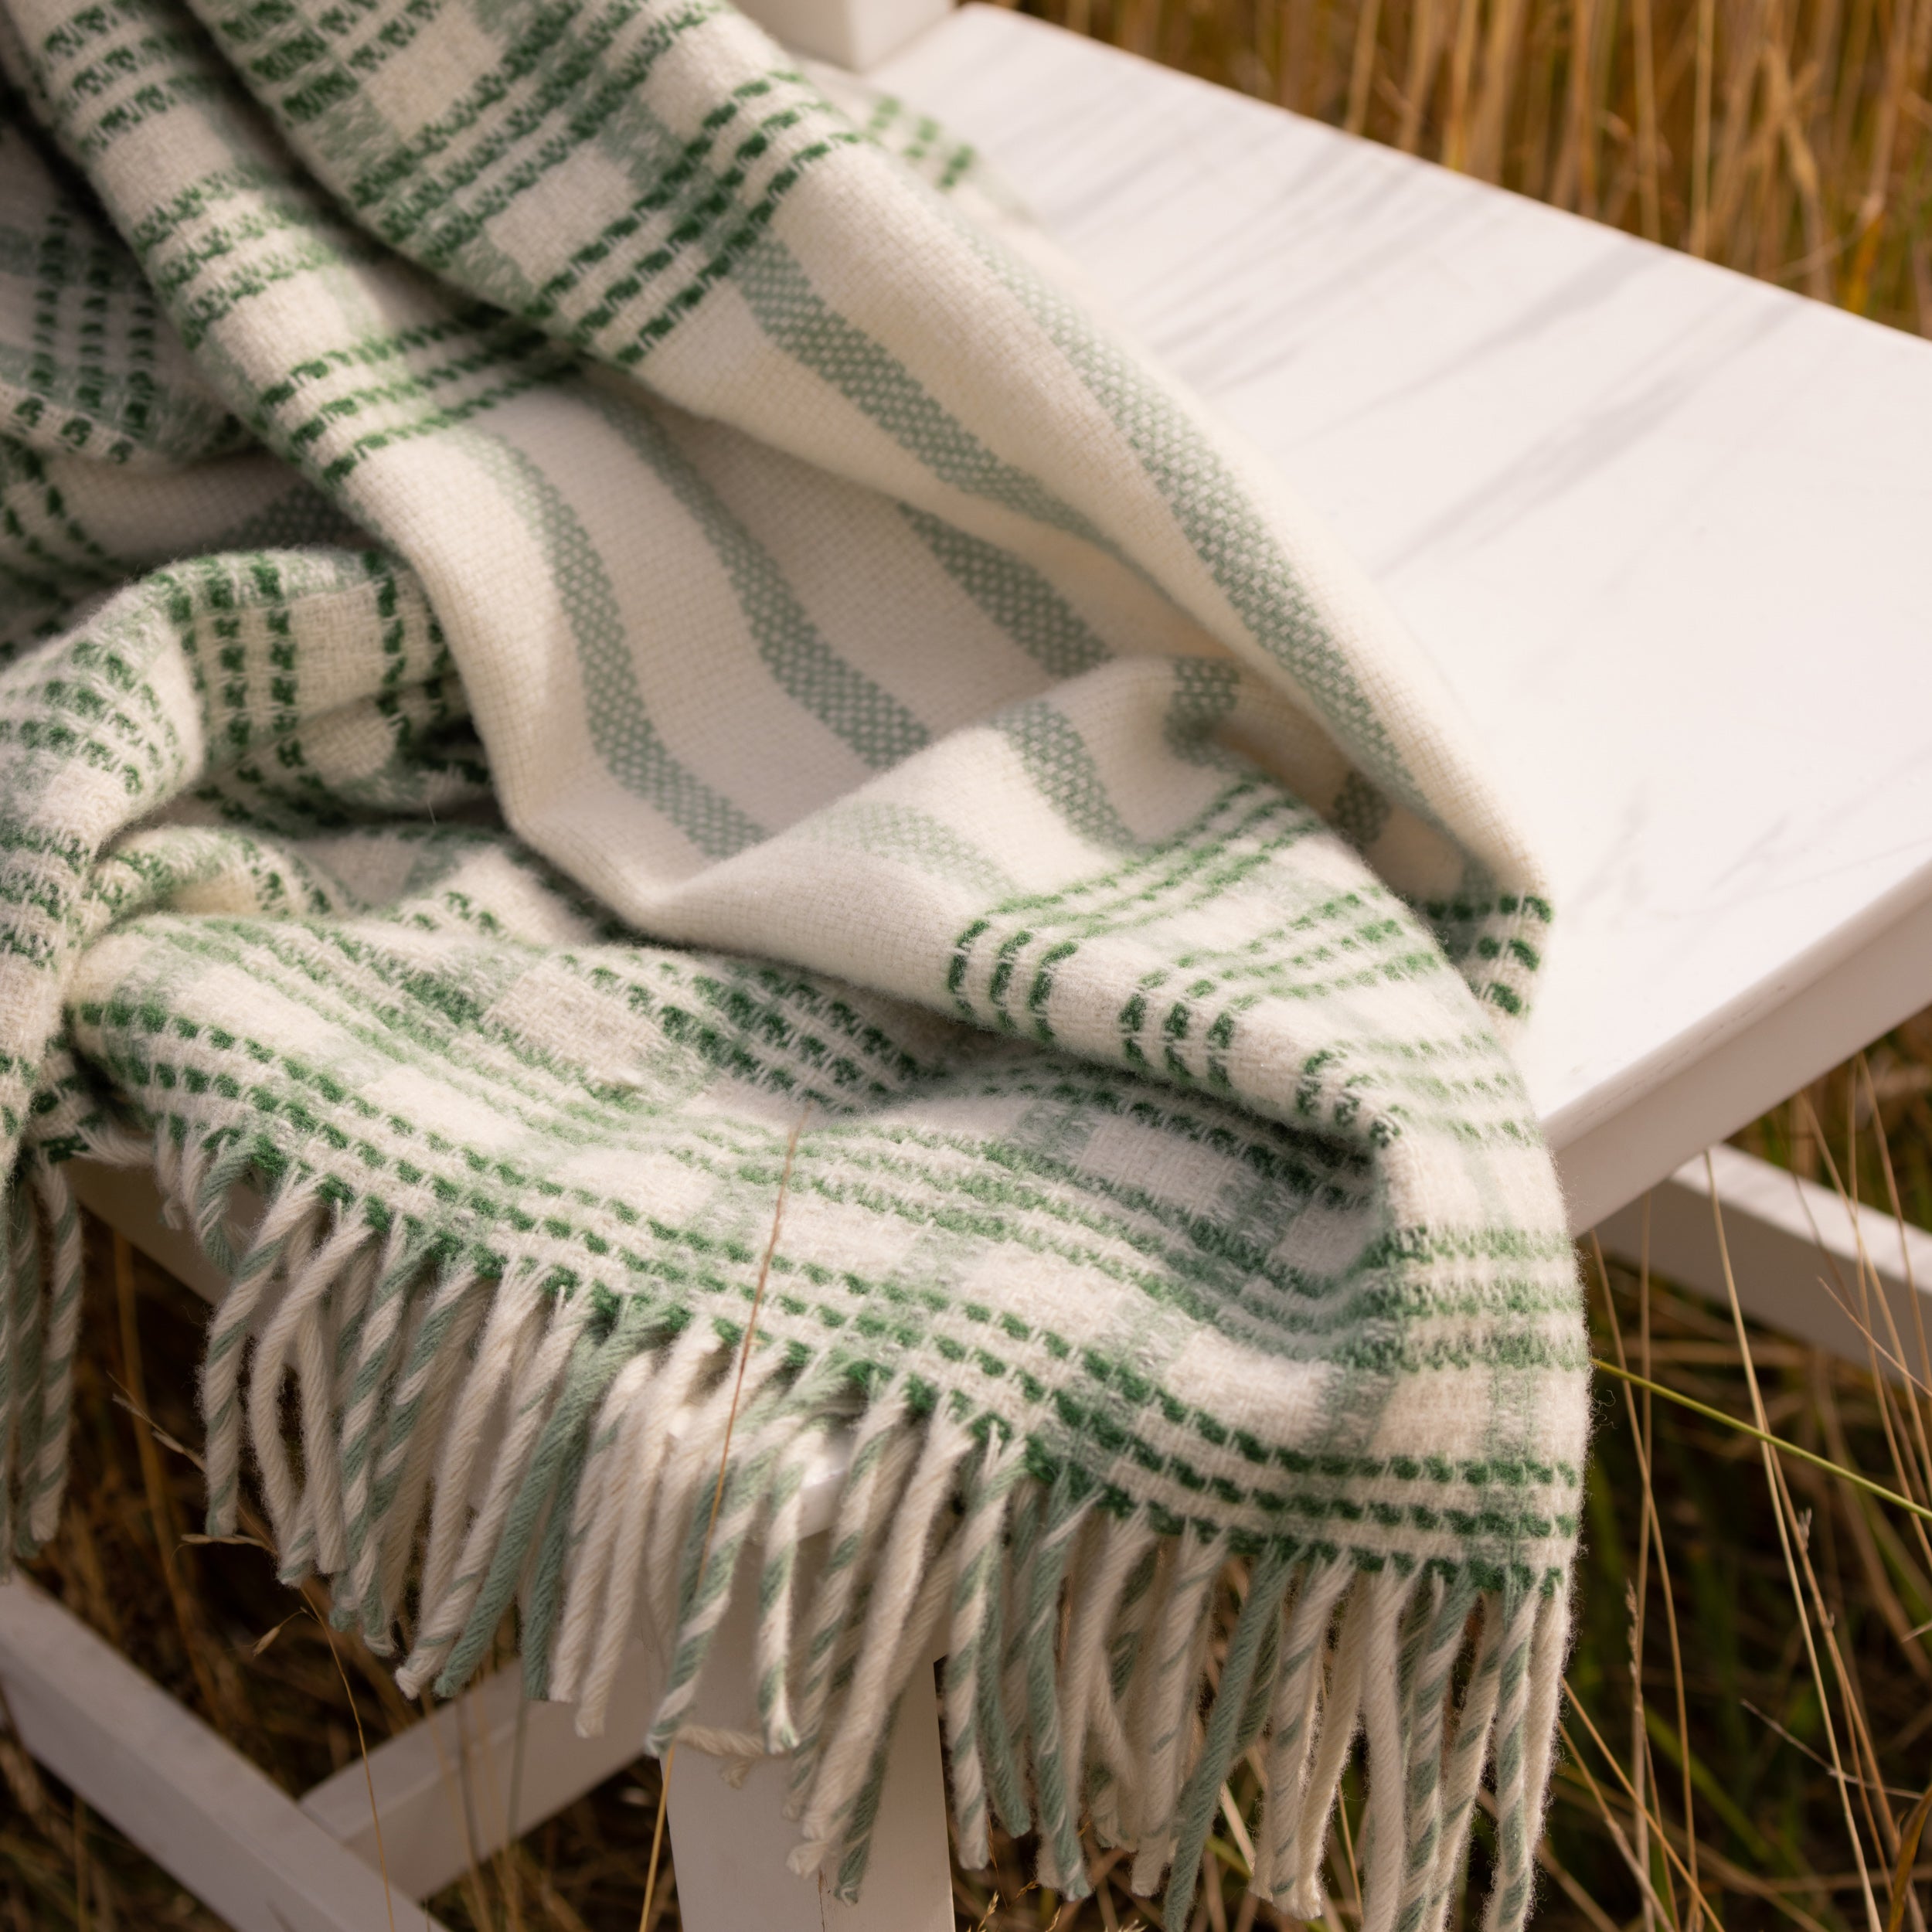 A wicker throw in greens draped over a chair.